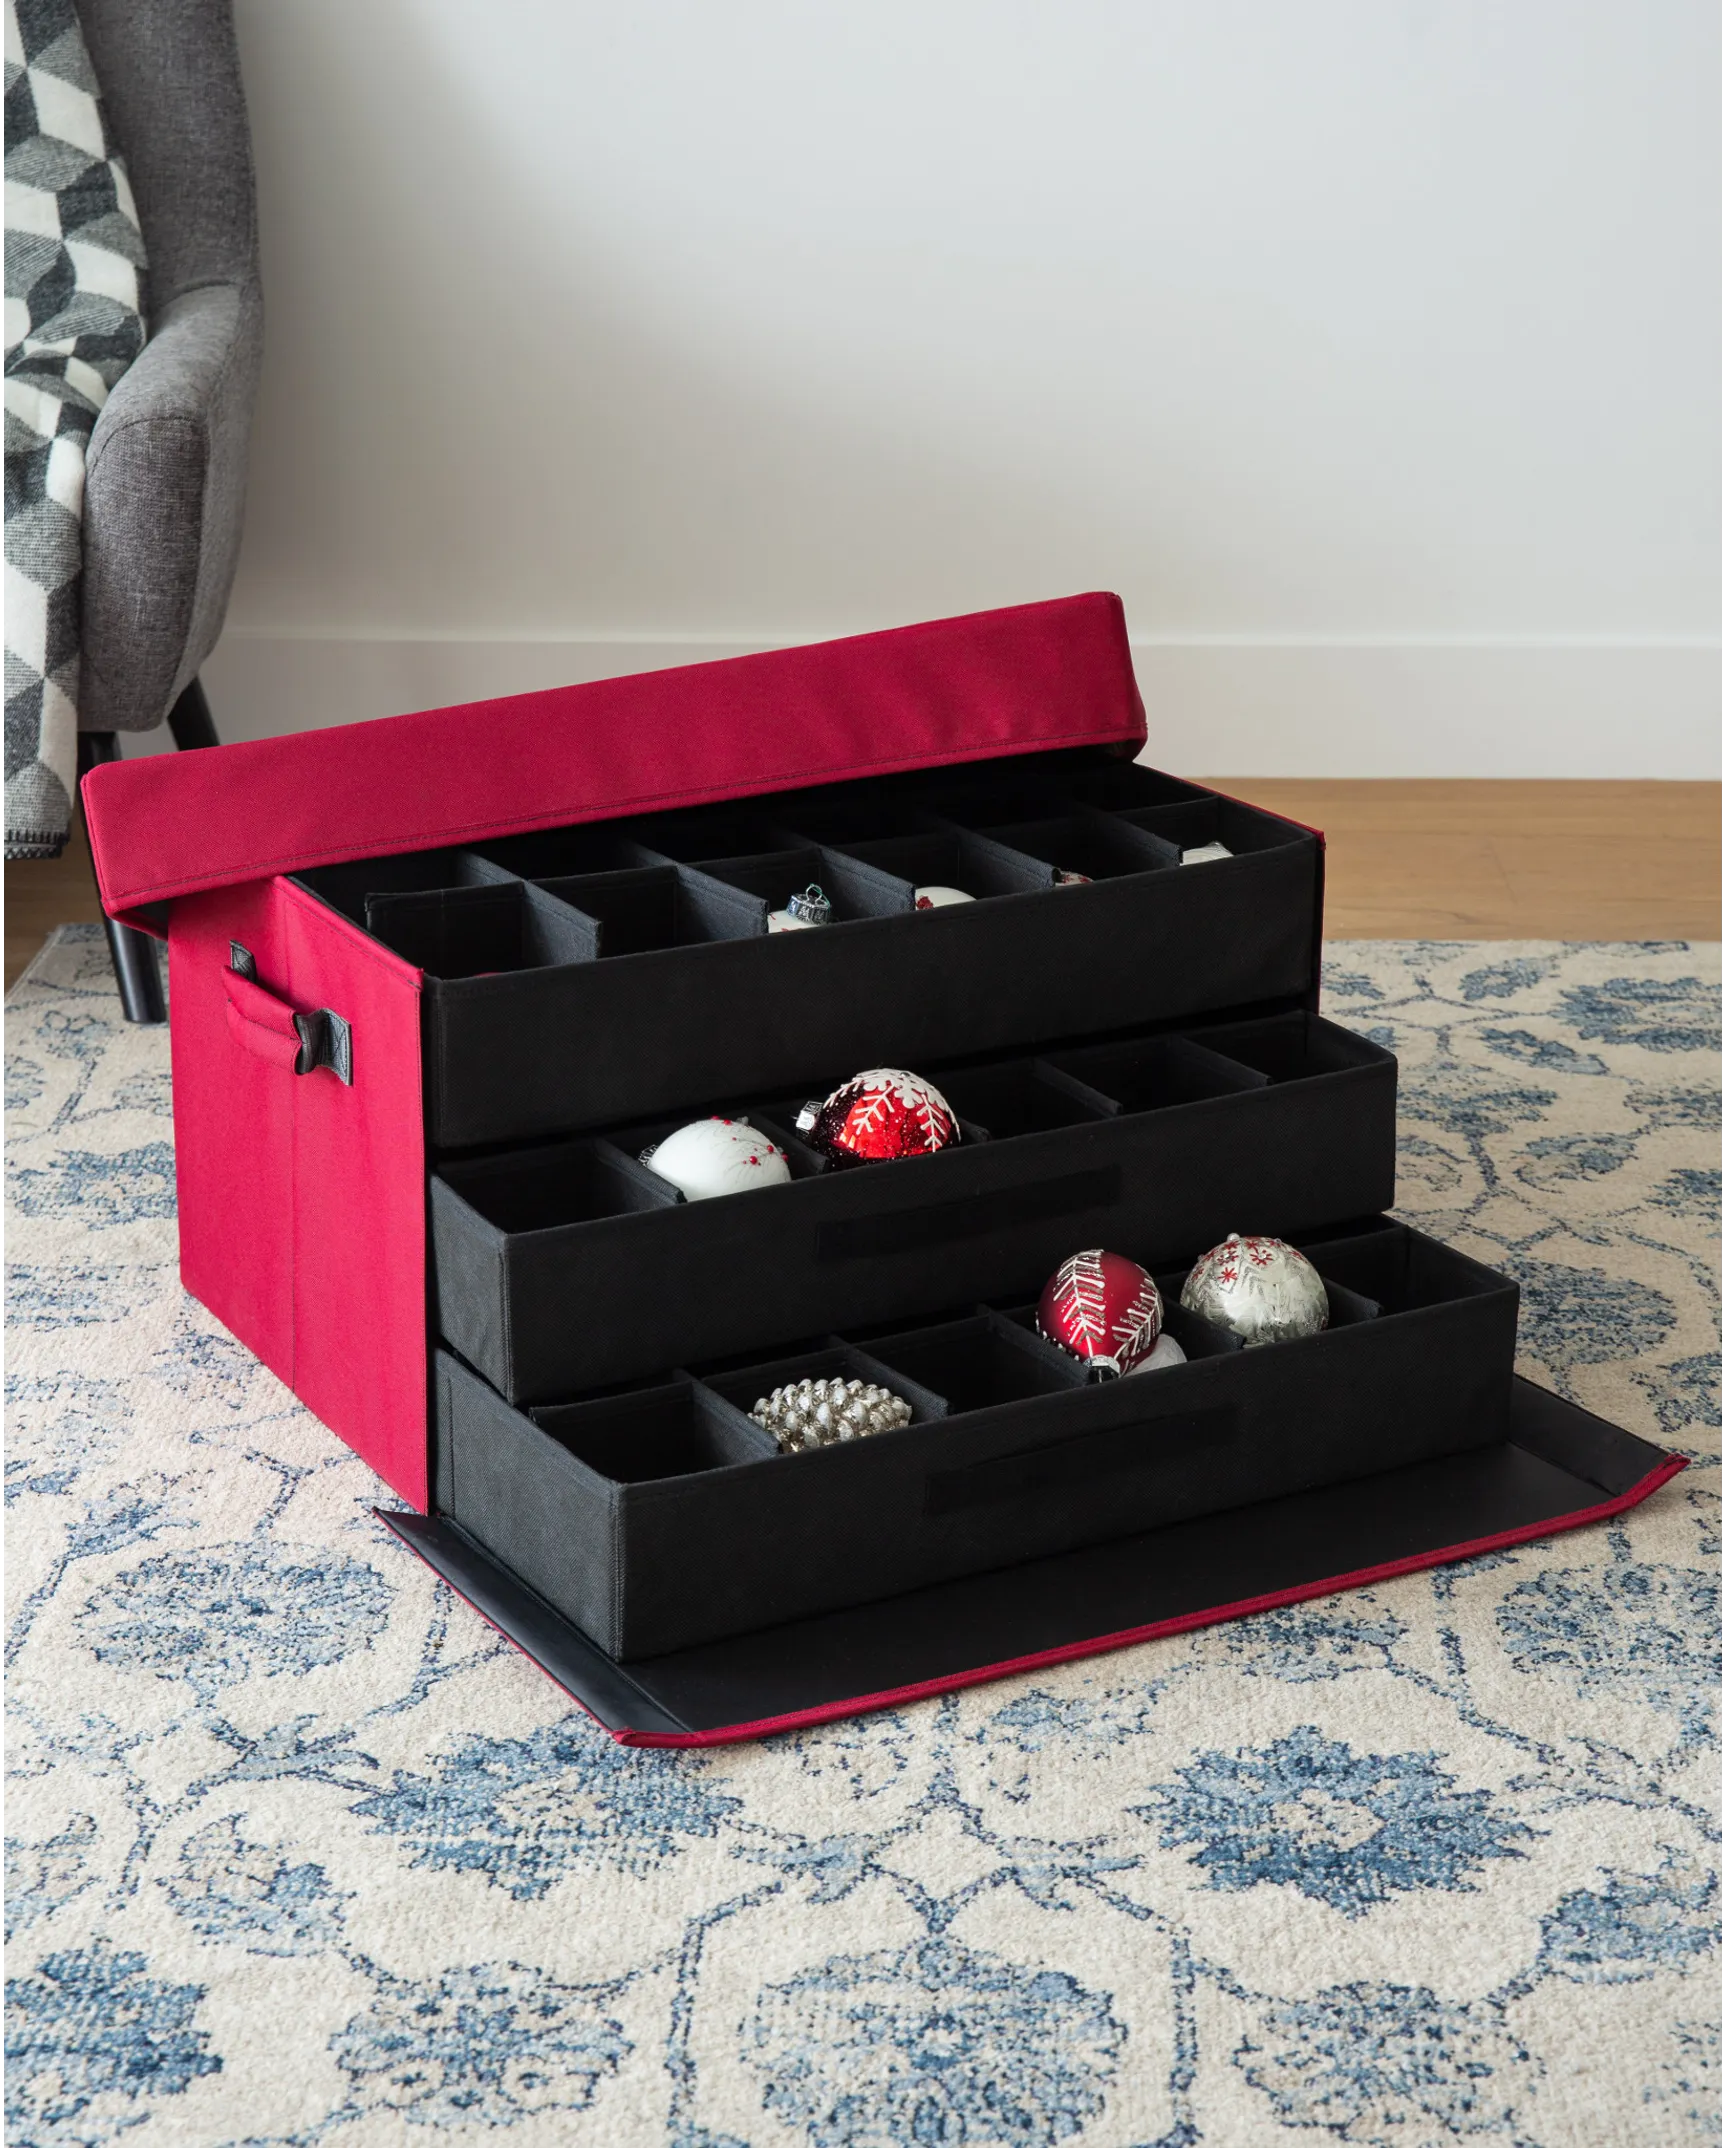 Durable Christmas Ball Storage Container Protects Your Valuable